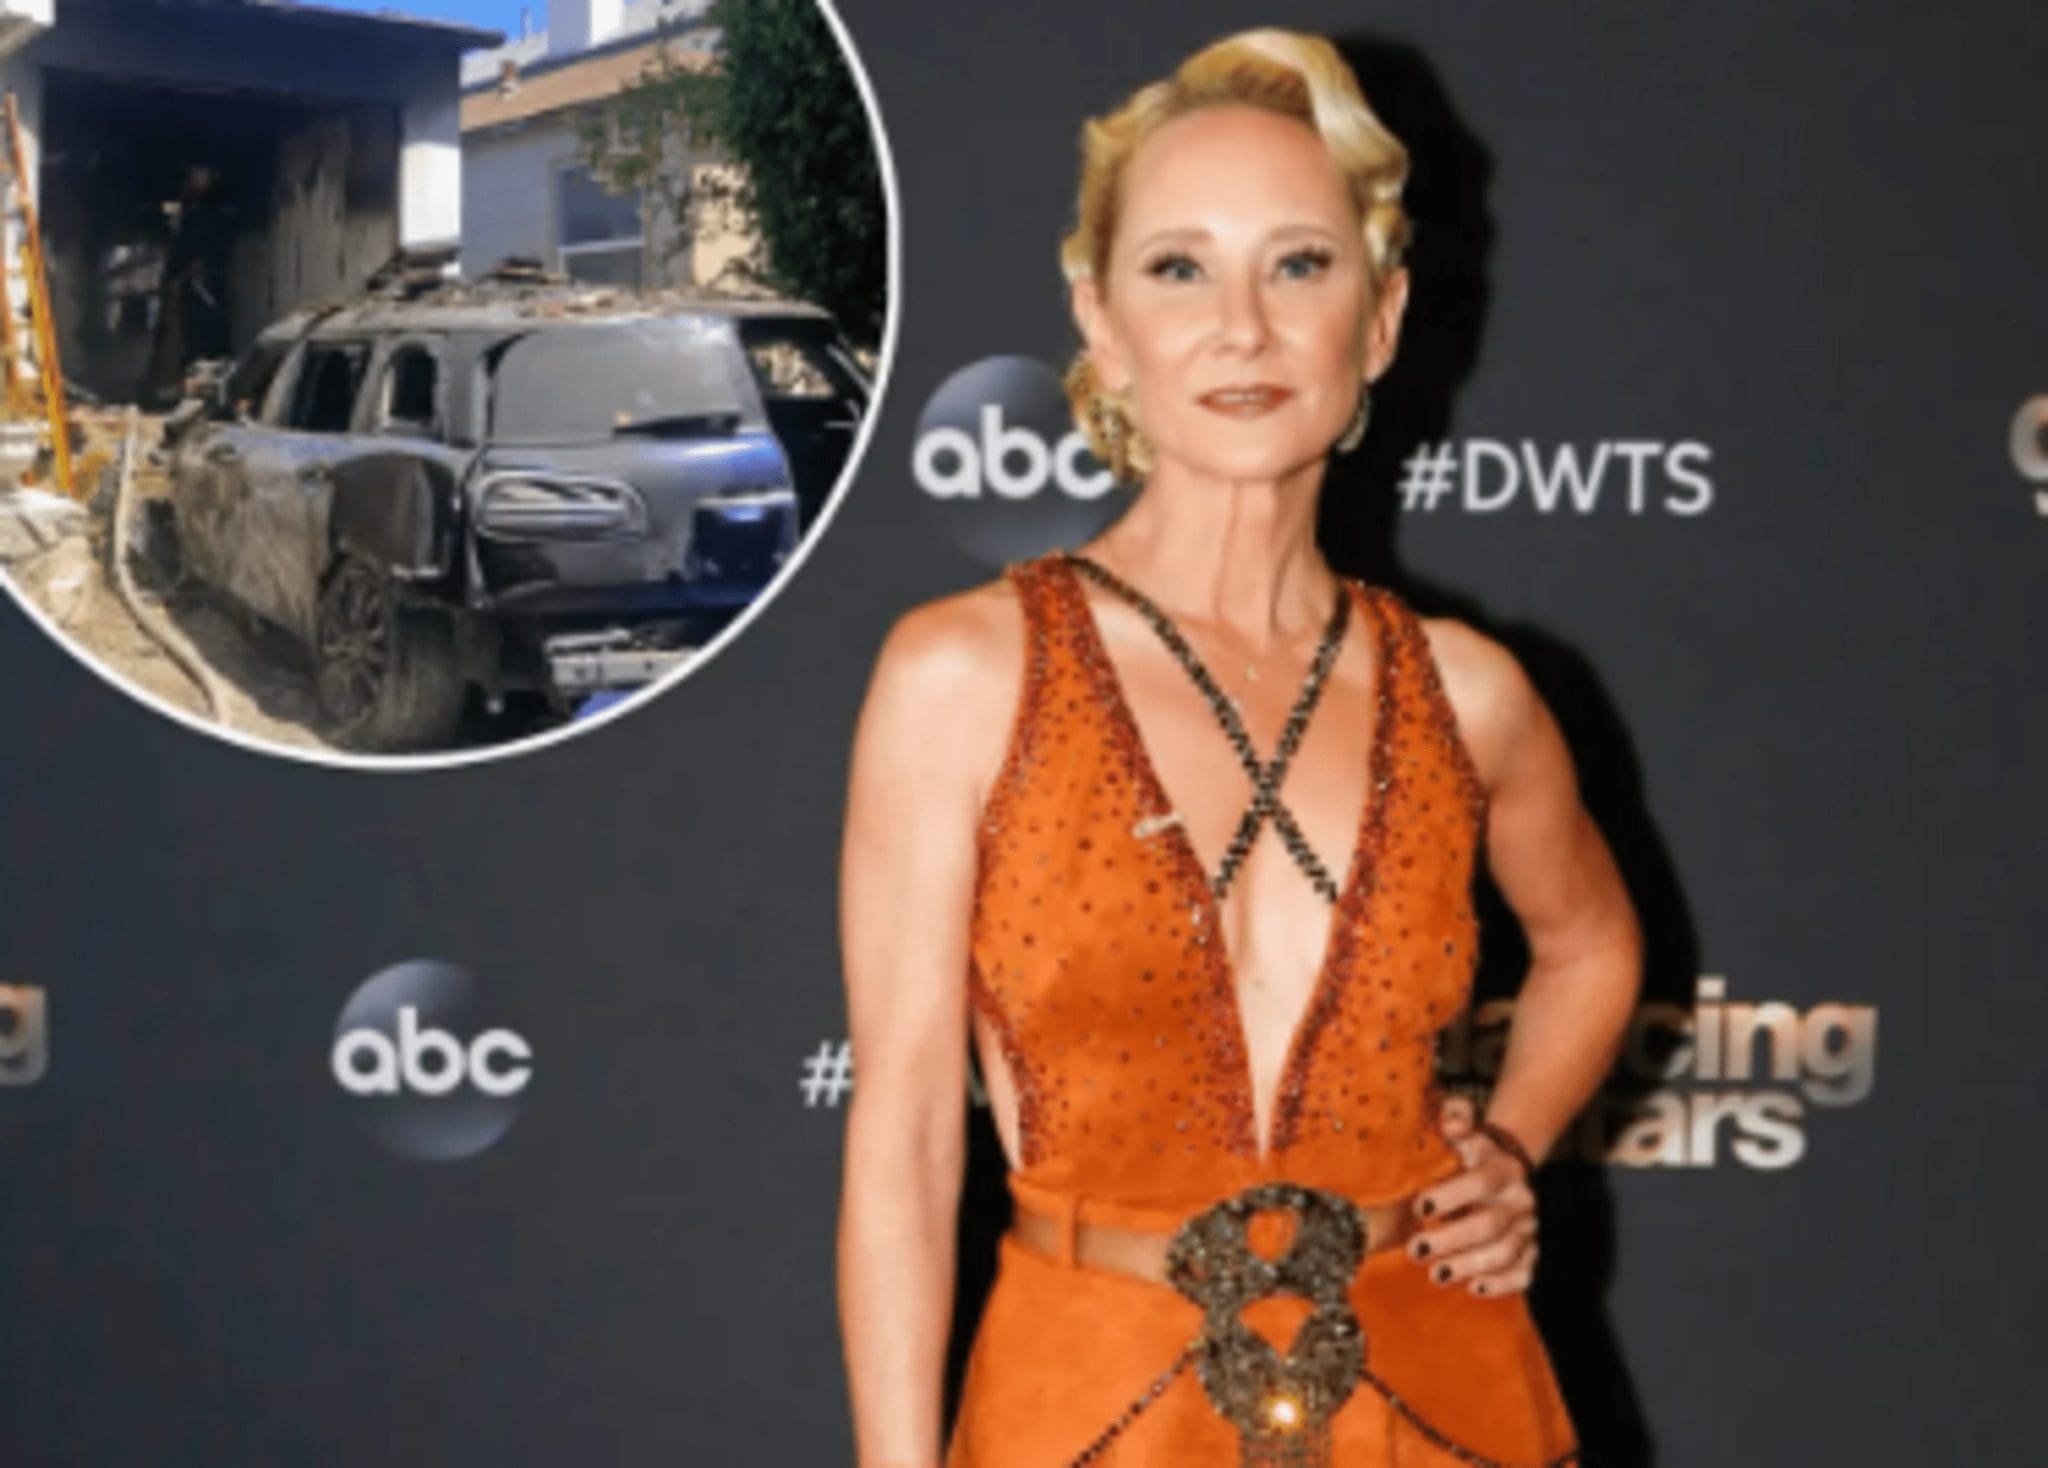 Due To Thermal Wounds And Smoke Inhalation, Anne Heche Passed Away